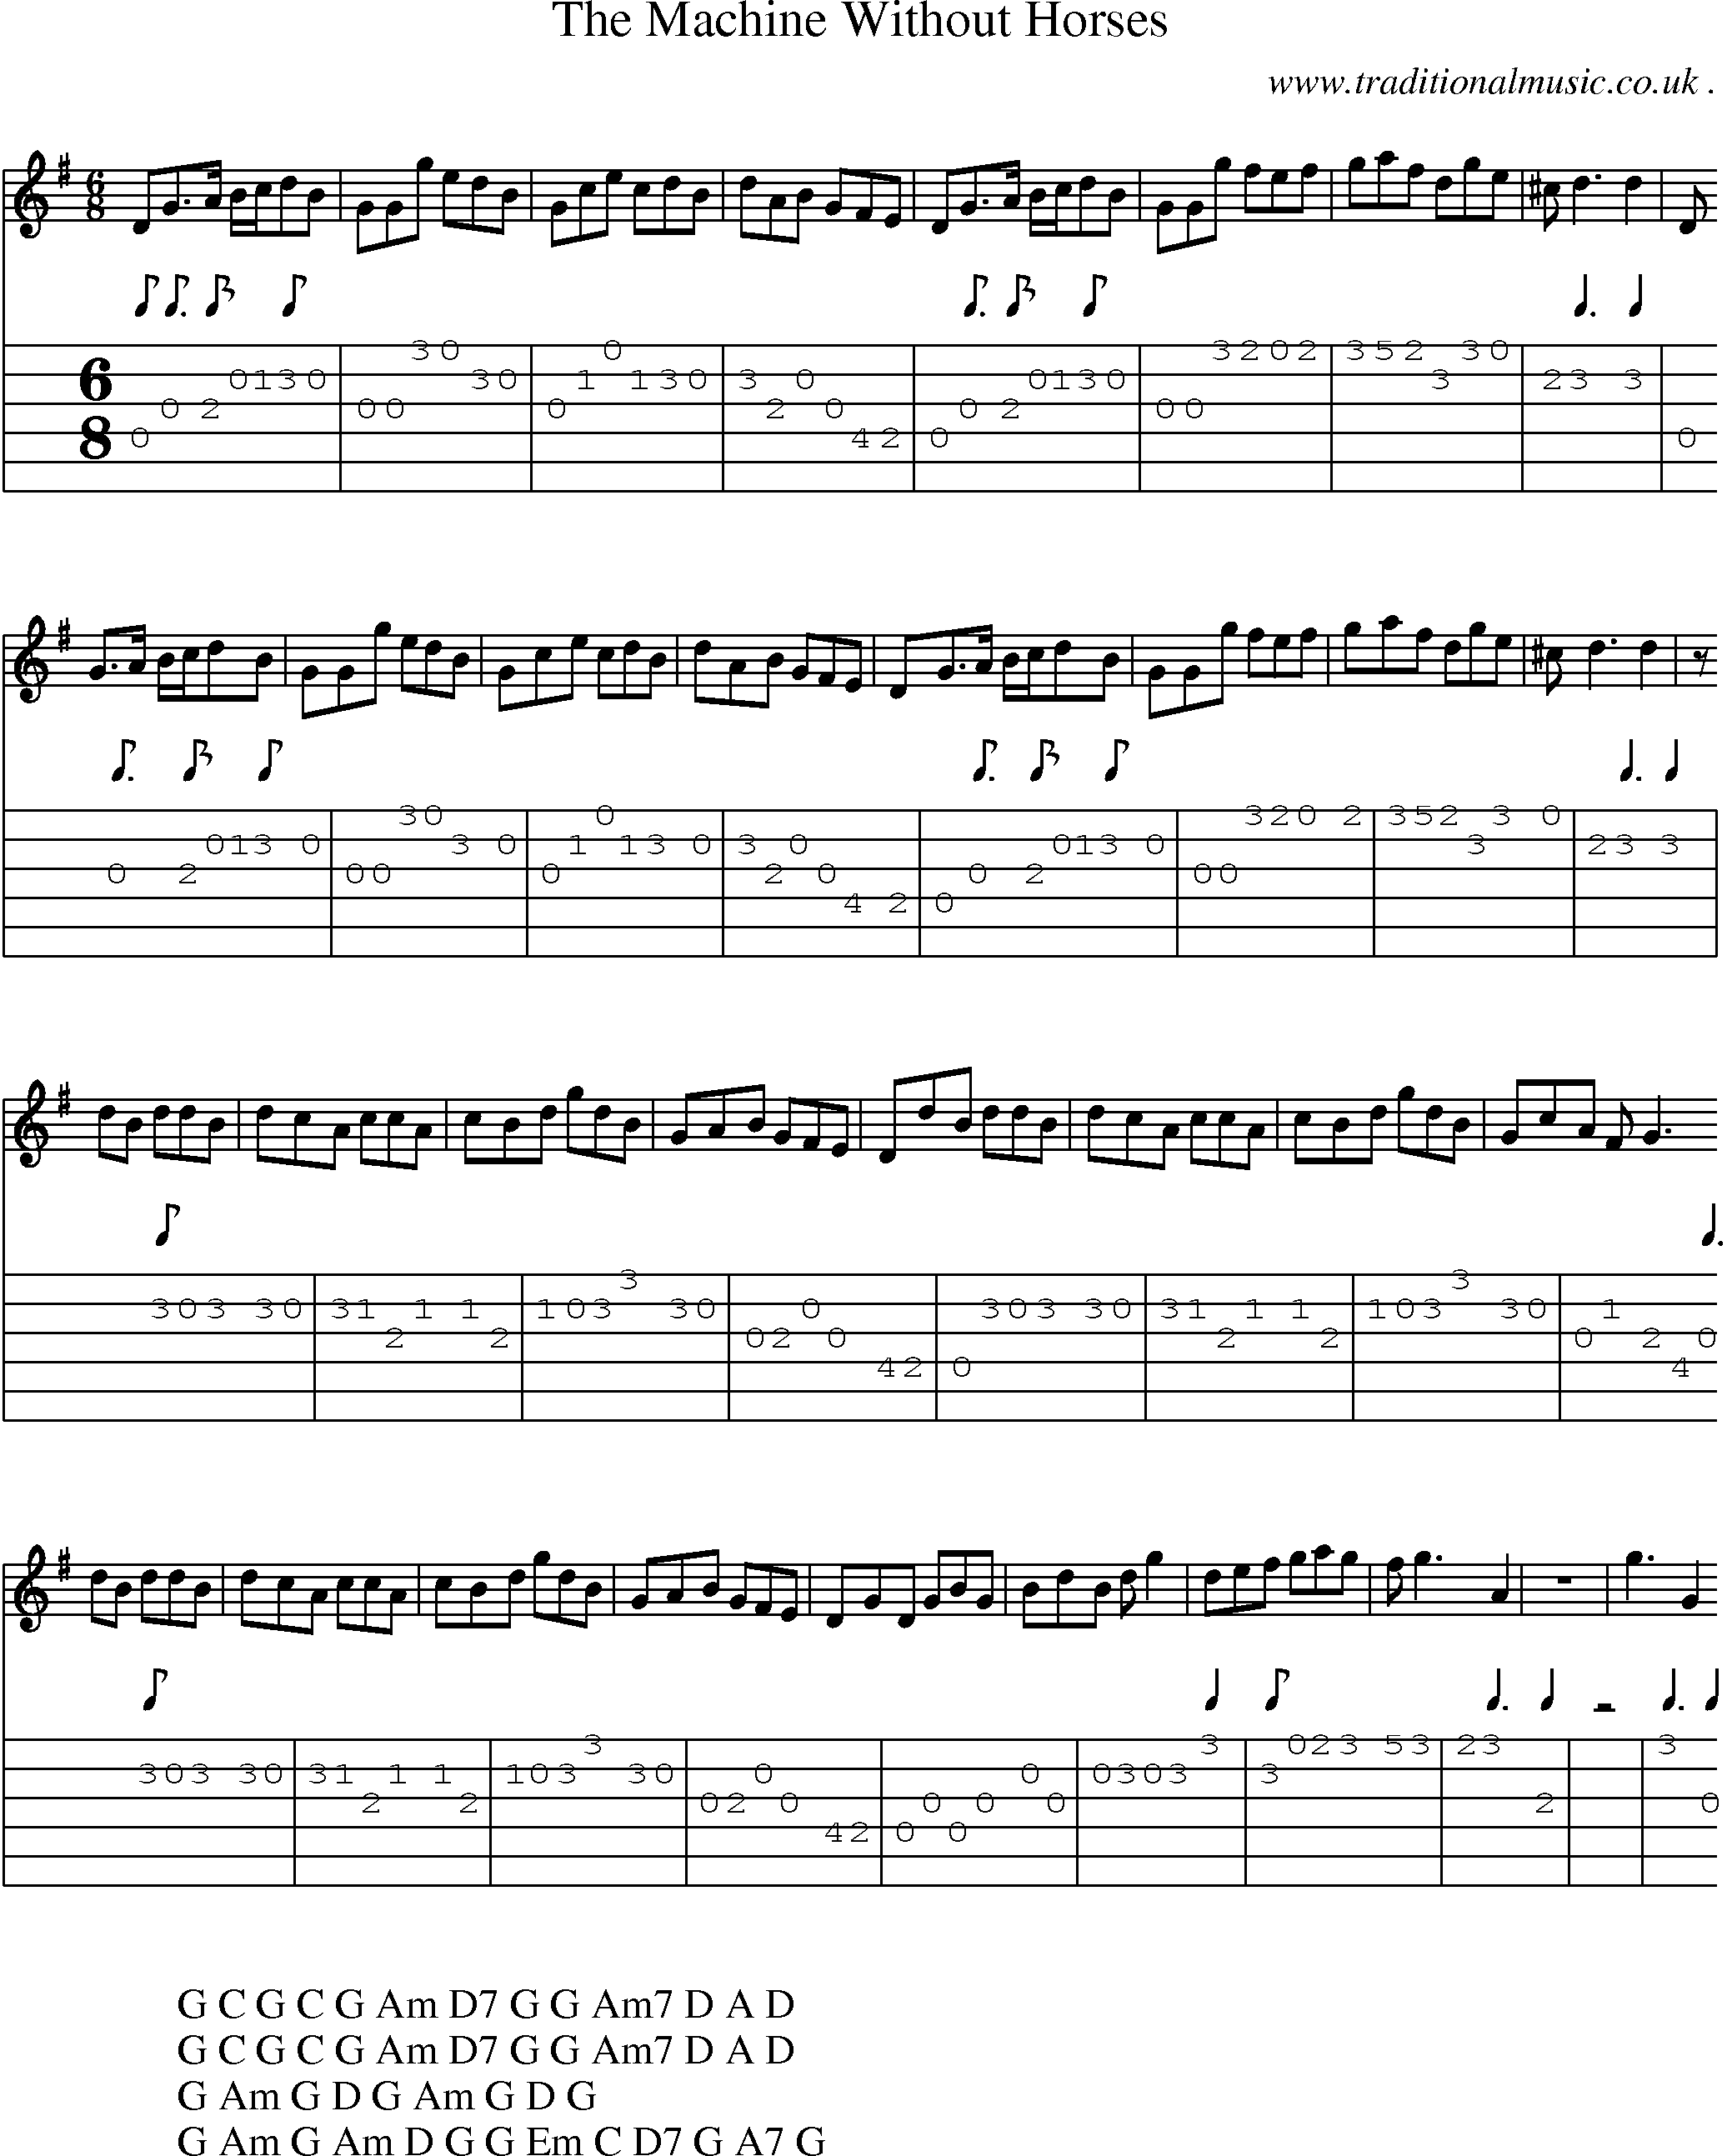 Sheet-Music and Guitar Tabs for The Machine Without Horses